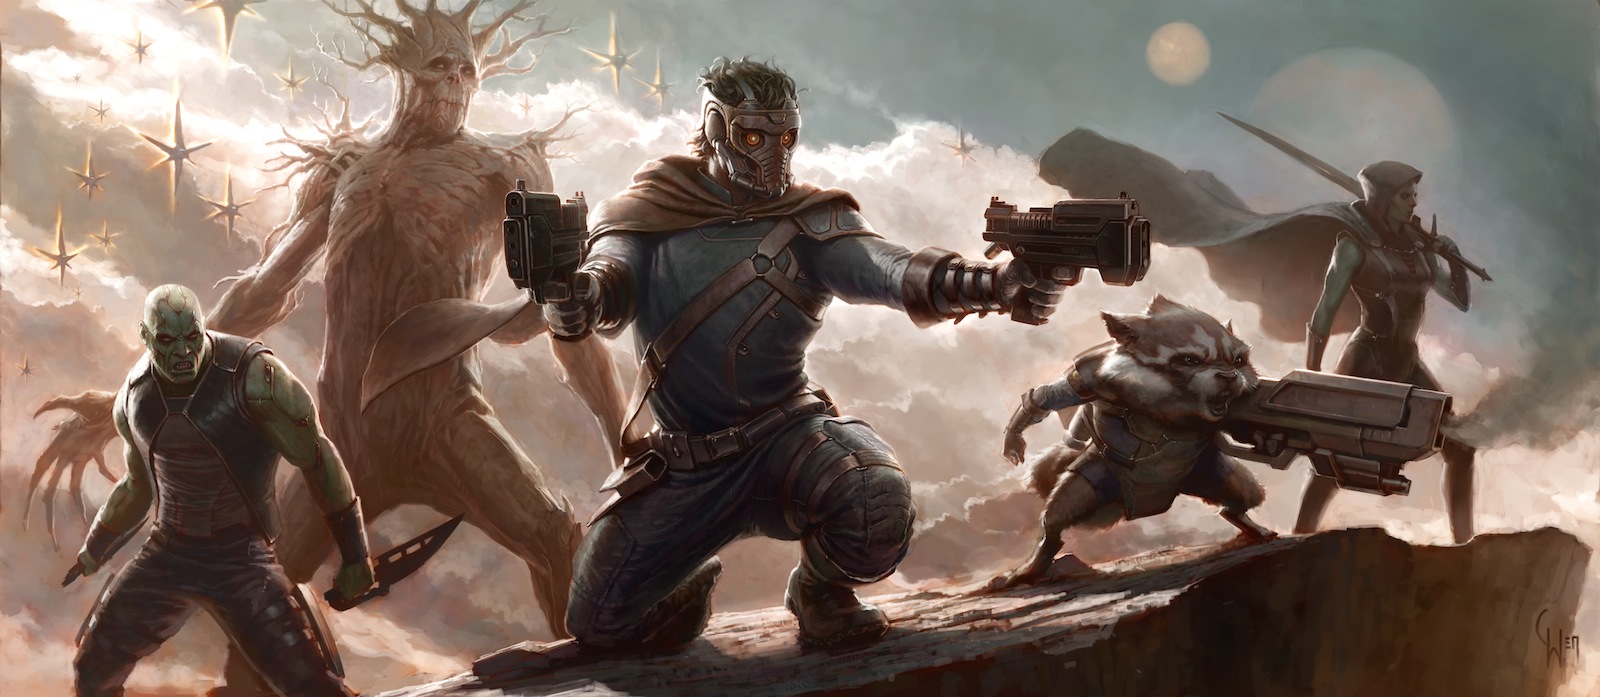 Guardians-of-the-galaxy-sdcc-concept-art.jpg